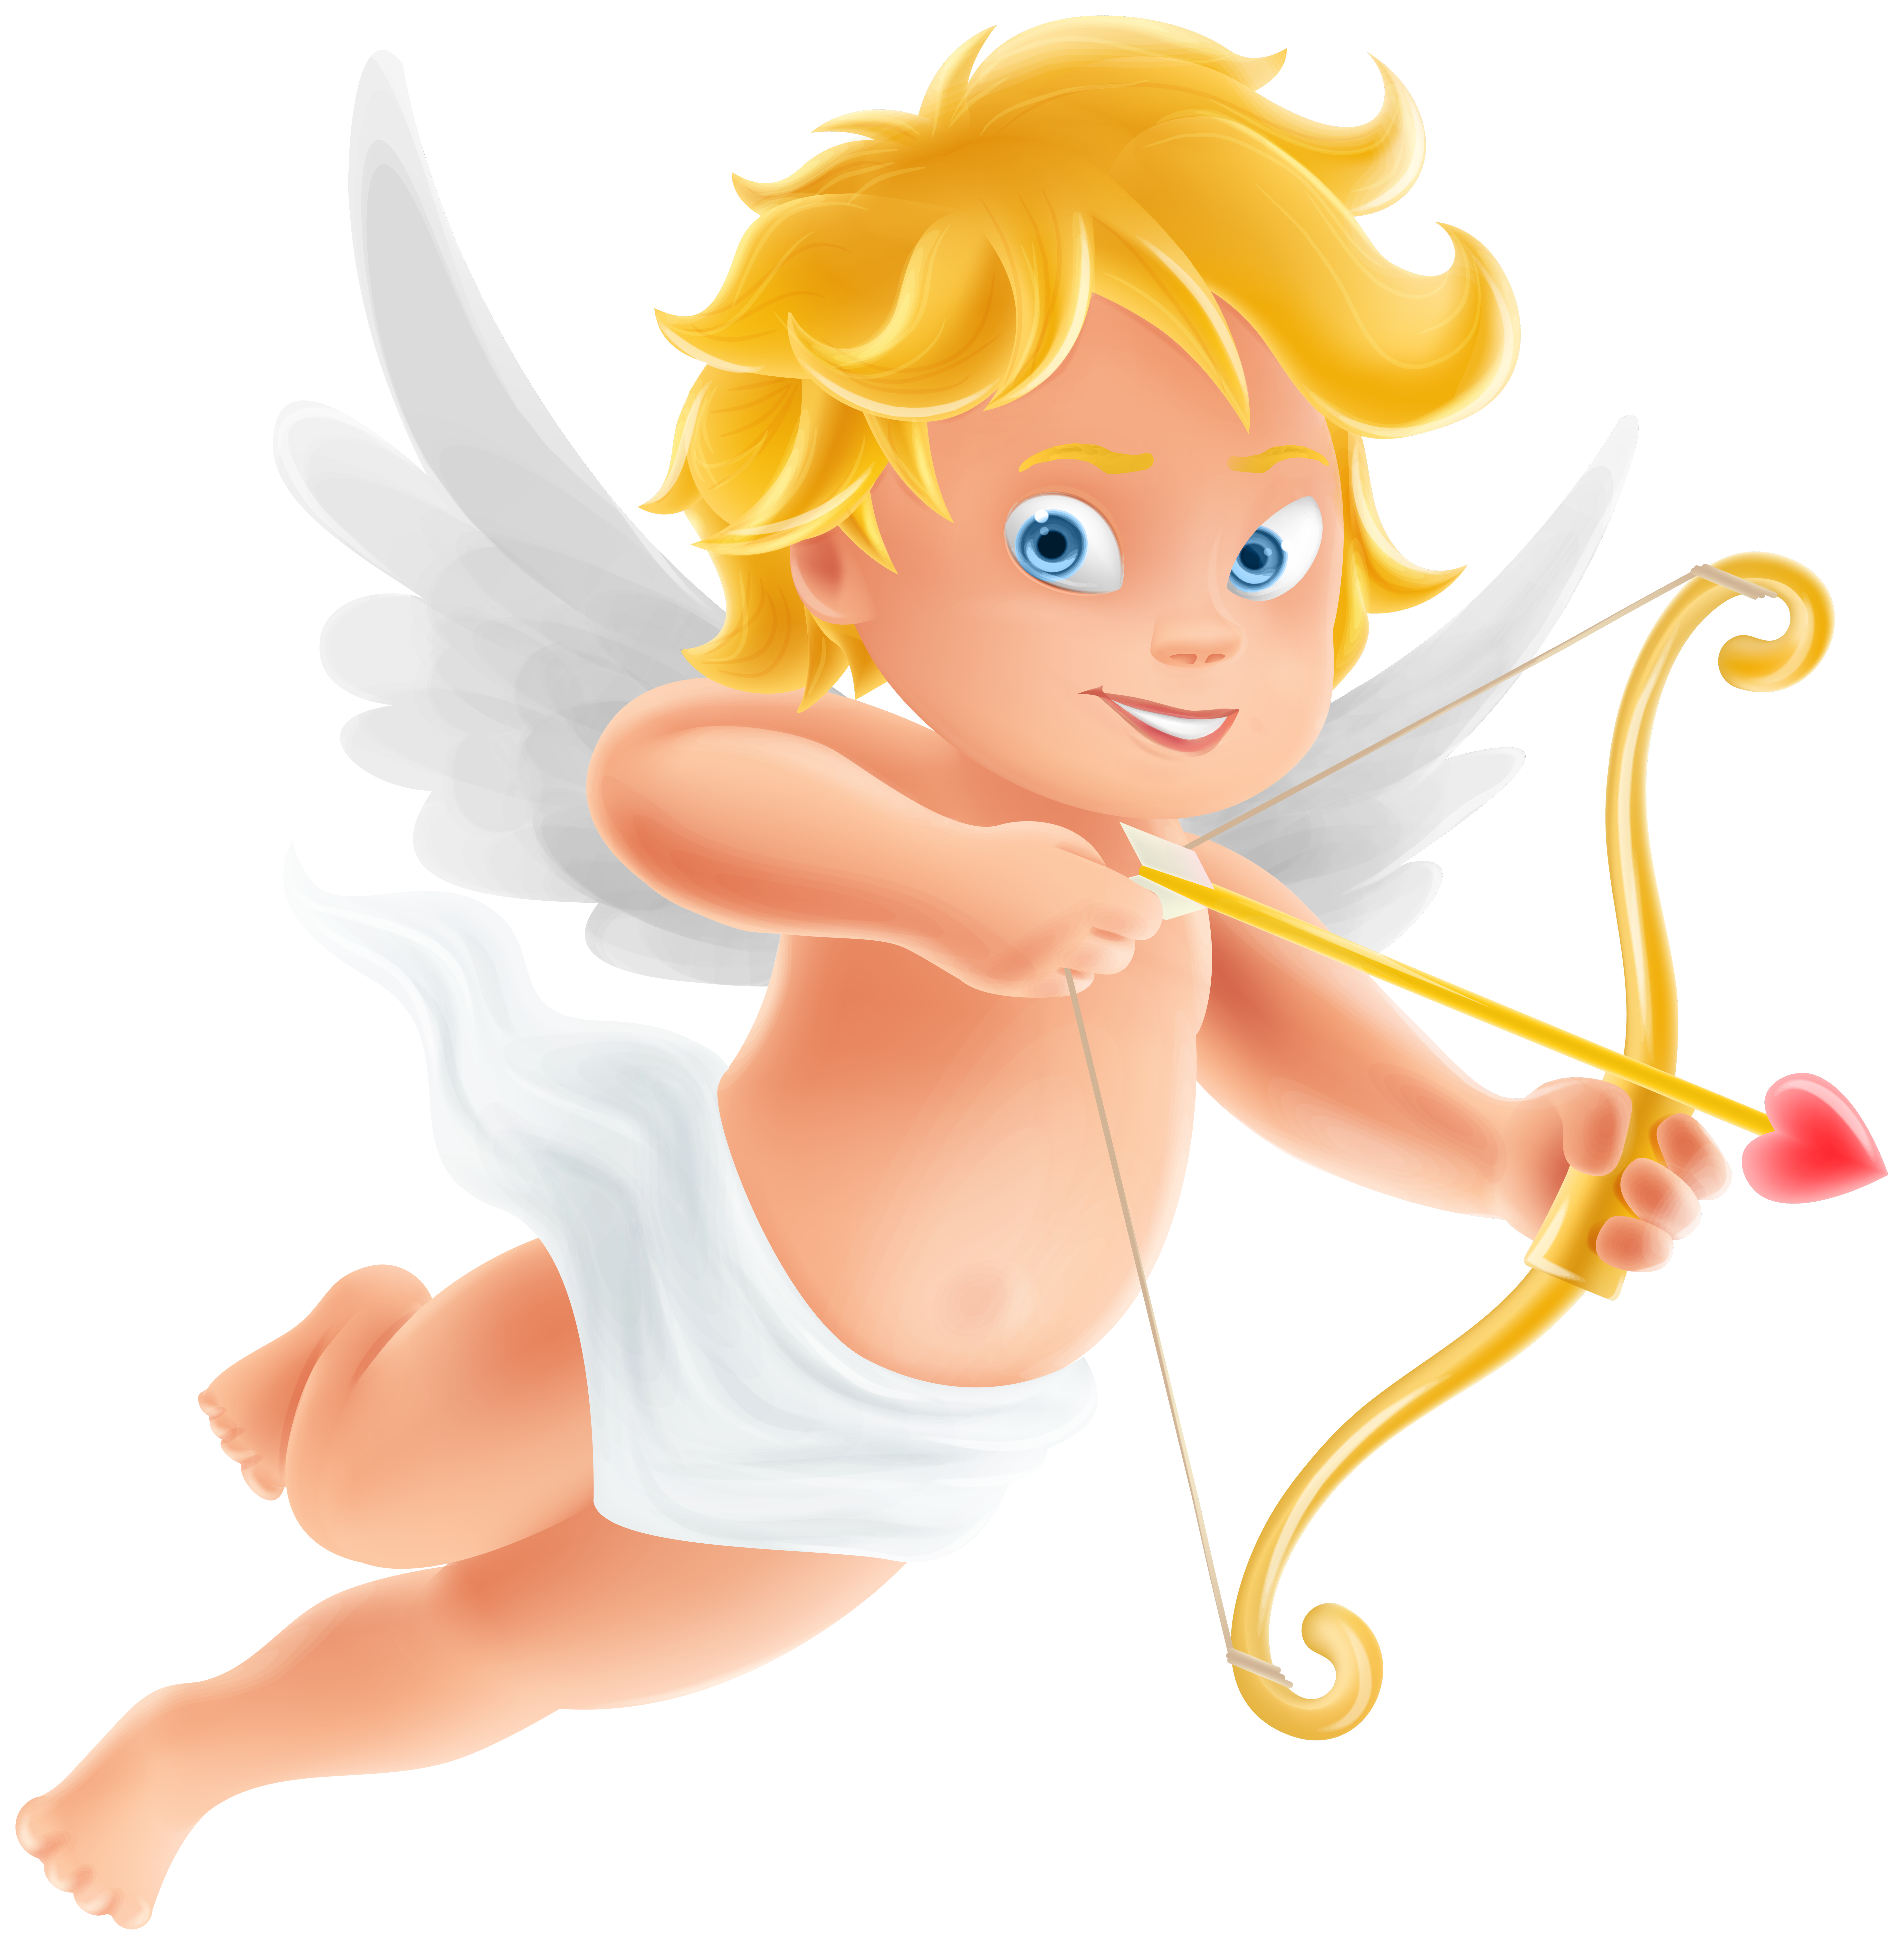 Cute Cupid Transparent Image Gallery Yopriceville High Images, Photos, Reviews